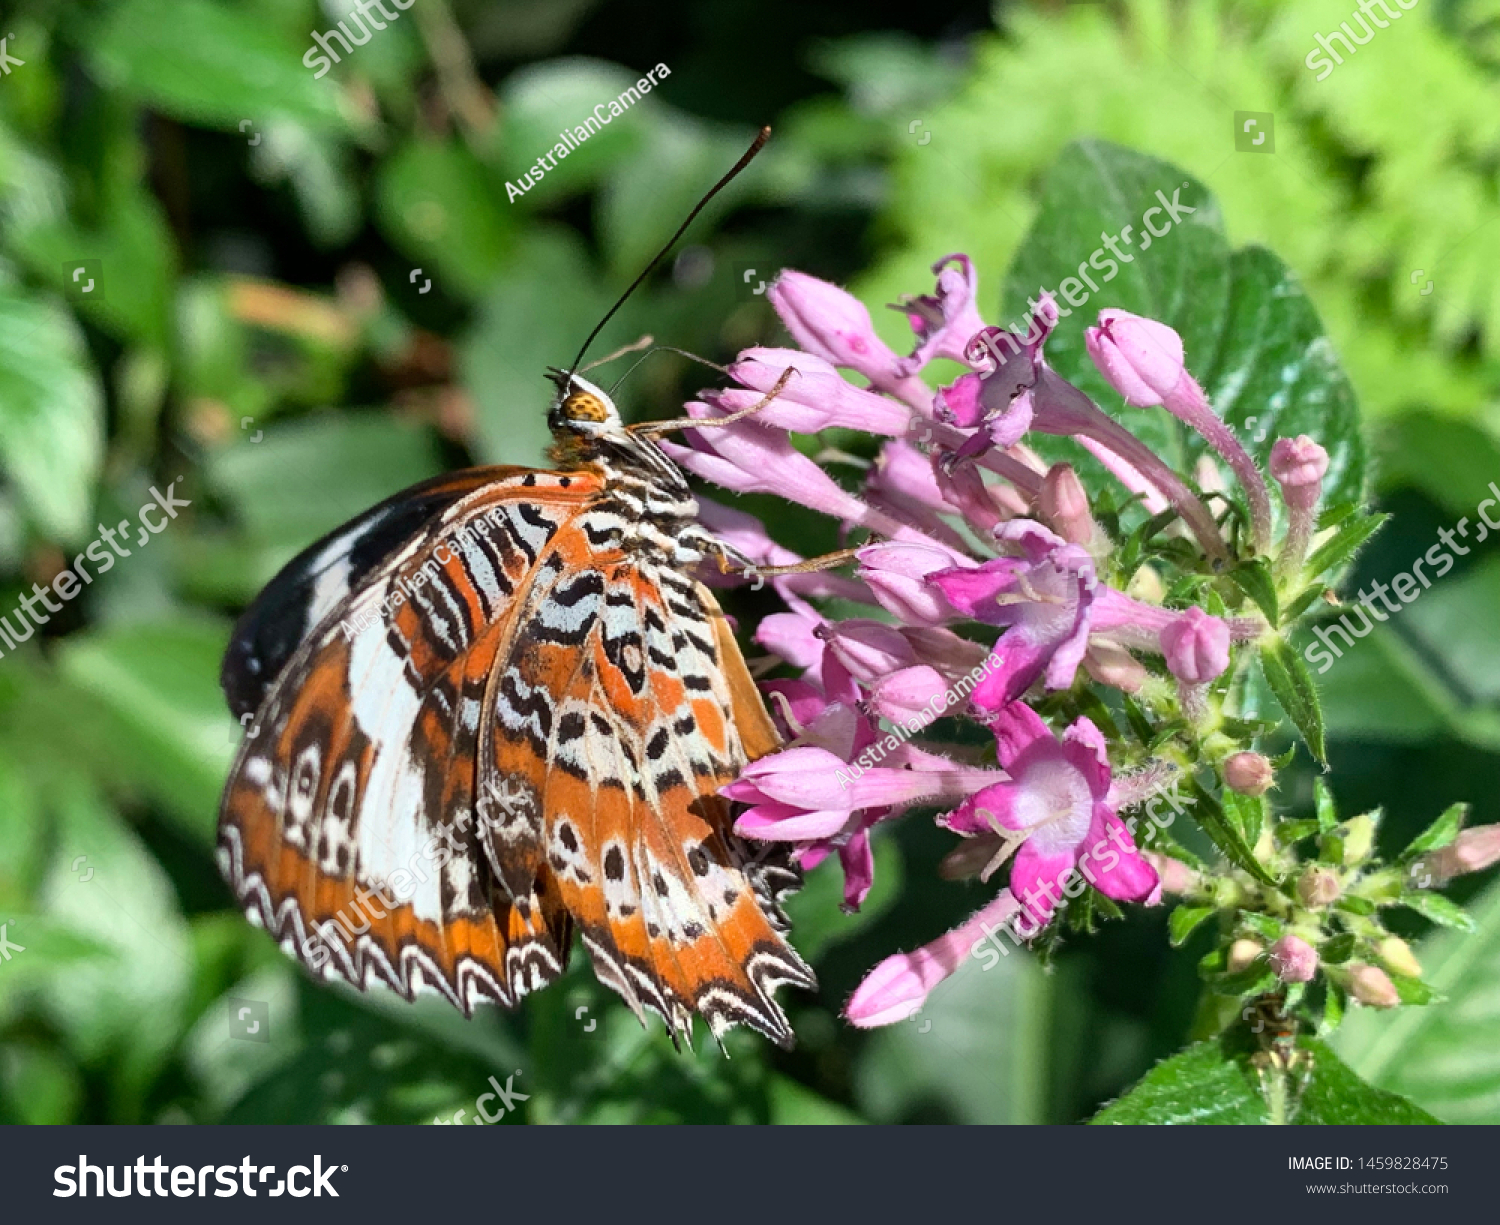 Butterfly Tropical Queensland Australia Stock Photo Edit Now ...